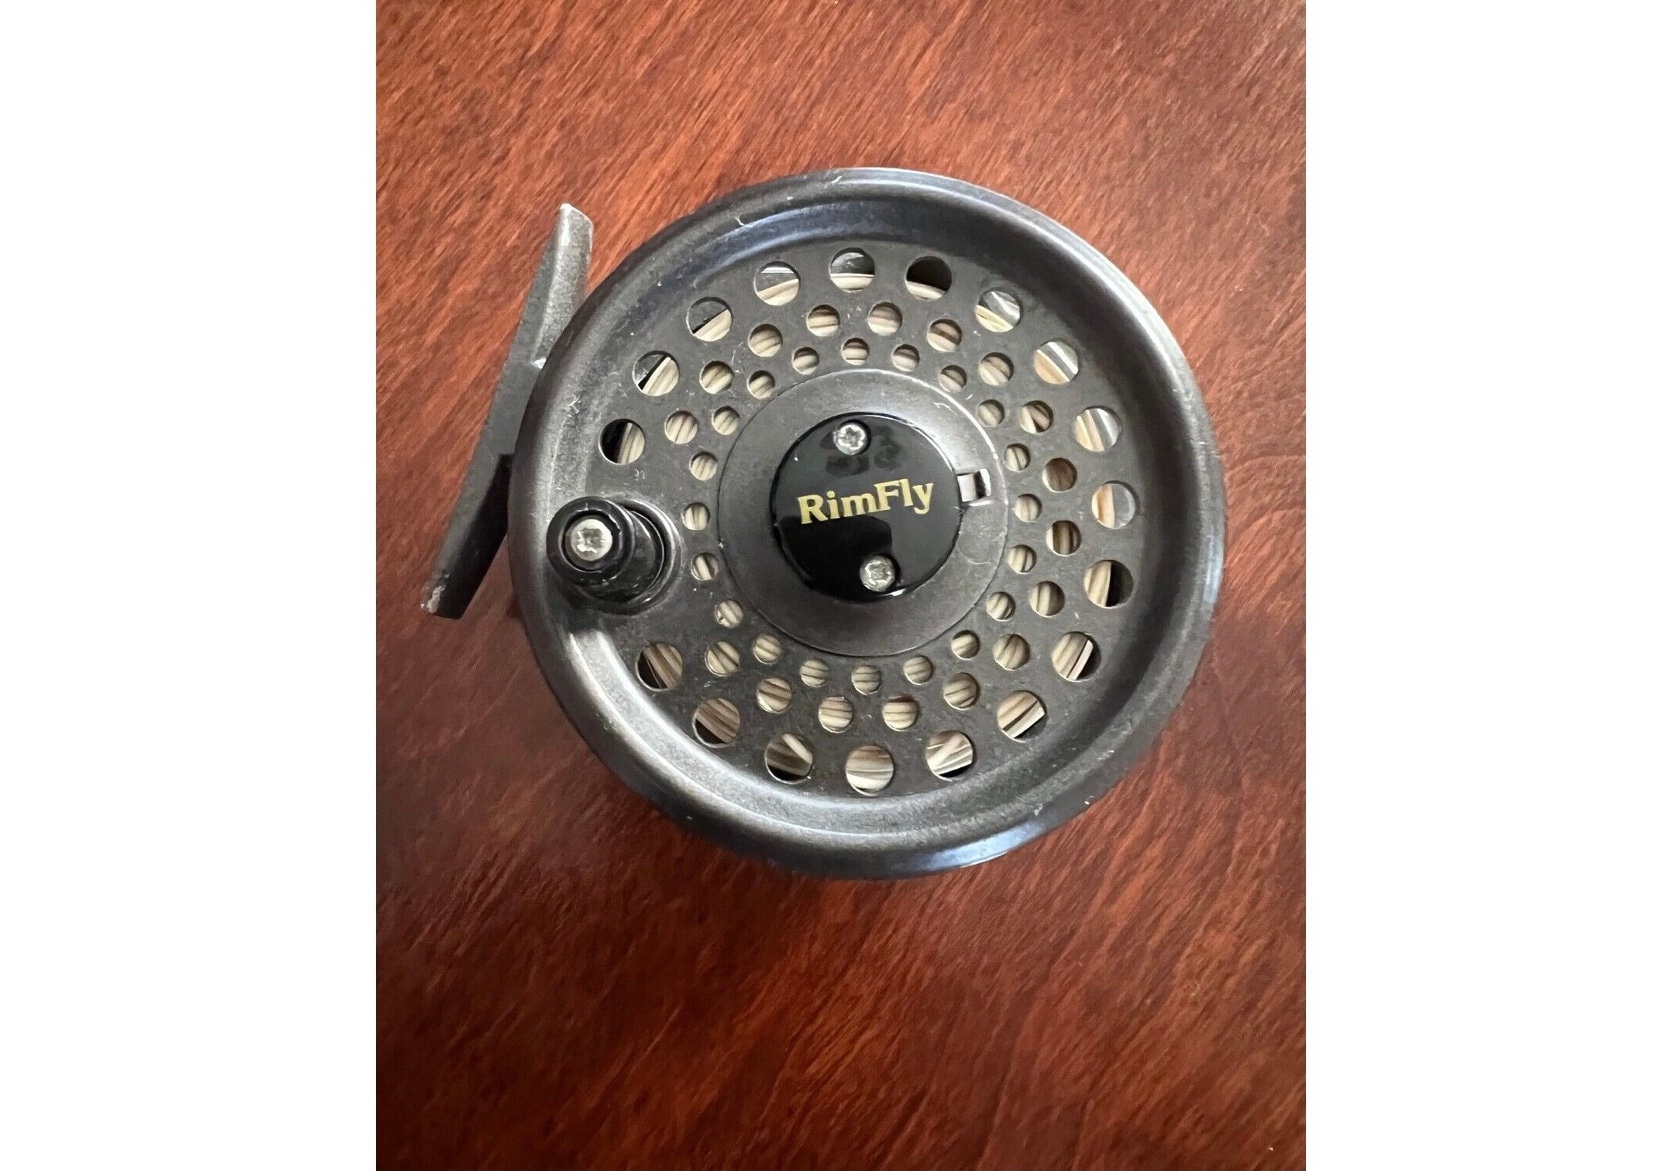 Vintage Cortland Medium Rimfly Fly Reel with Fly line